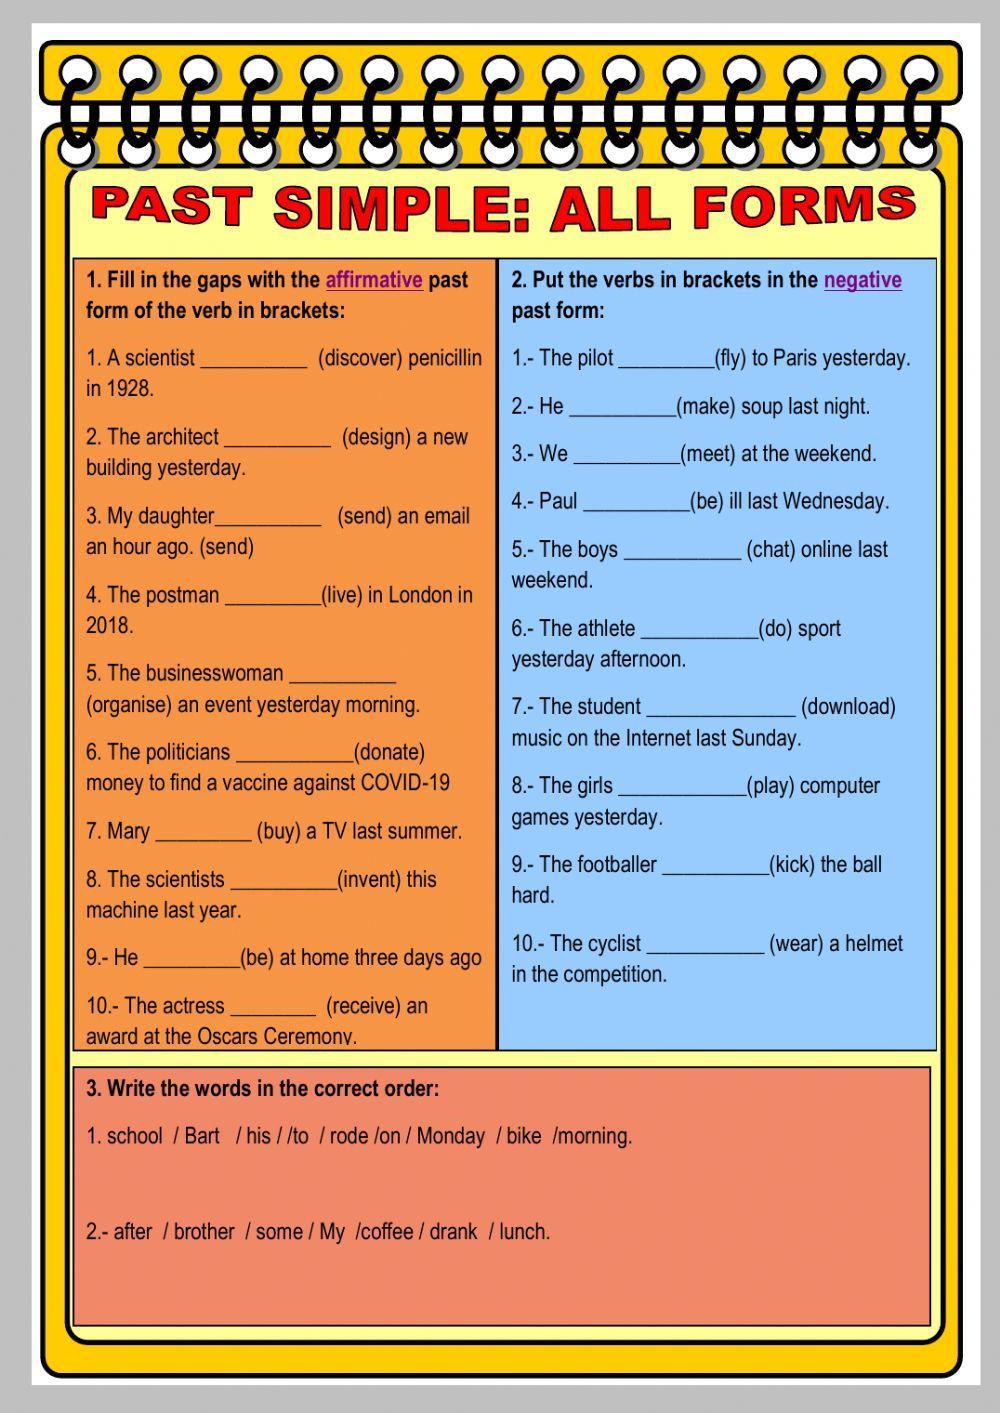 Past Simple: All Forms